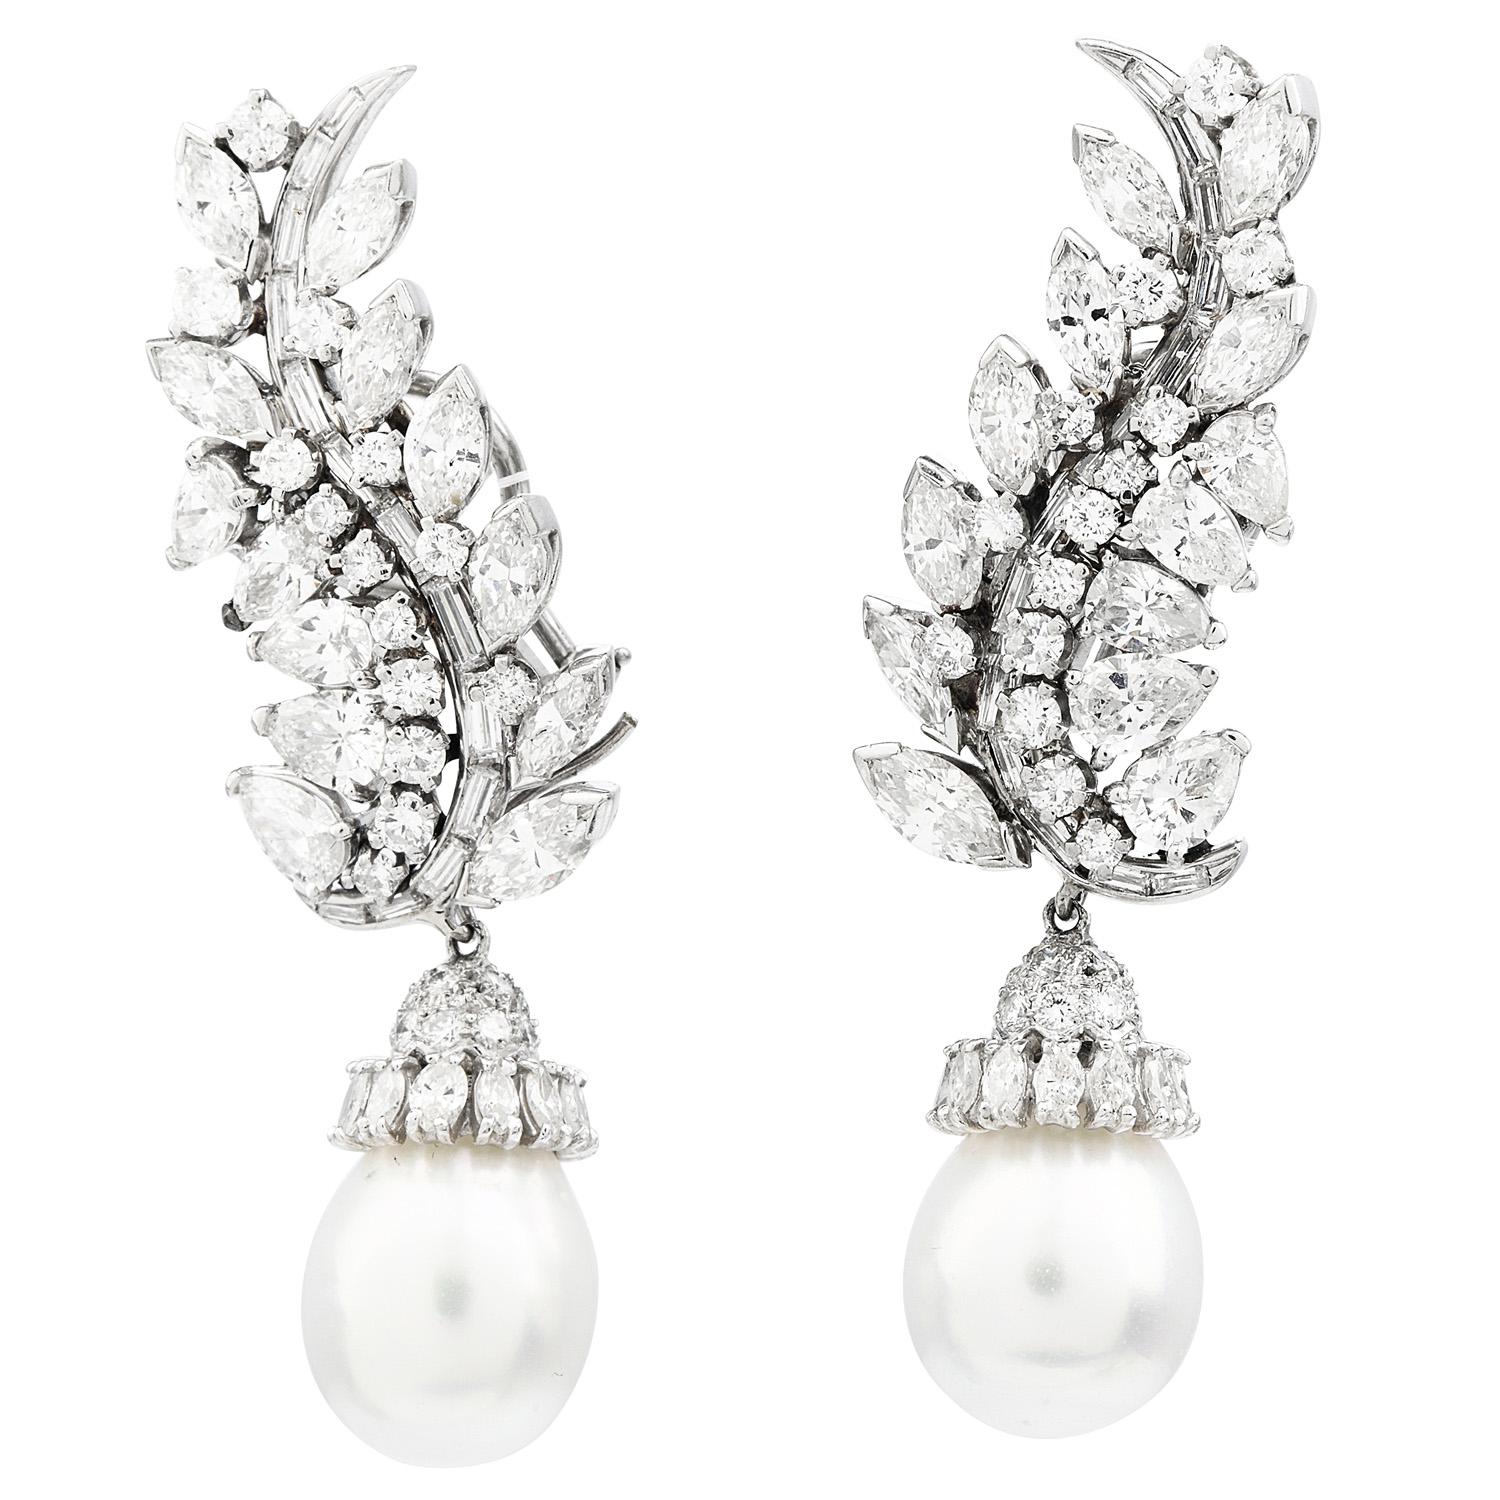 This is a stunning pair of Day and Night South Sea Pearl & Diamonds Botanical Leafs Motif Dangle Drop Earrings weighing approximately 28.6 grams.

Exquisitely crafted in luxurious platinum, featuring (2) outstanding Genuine South Sea Pearls